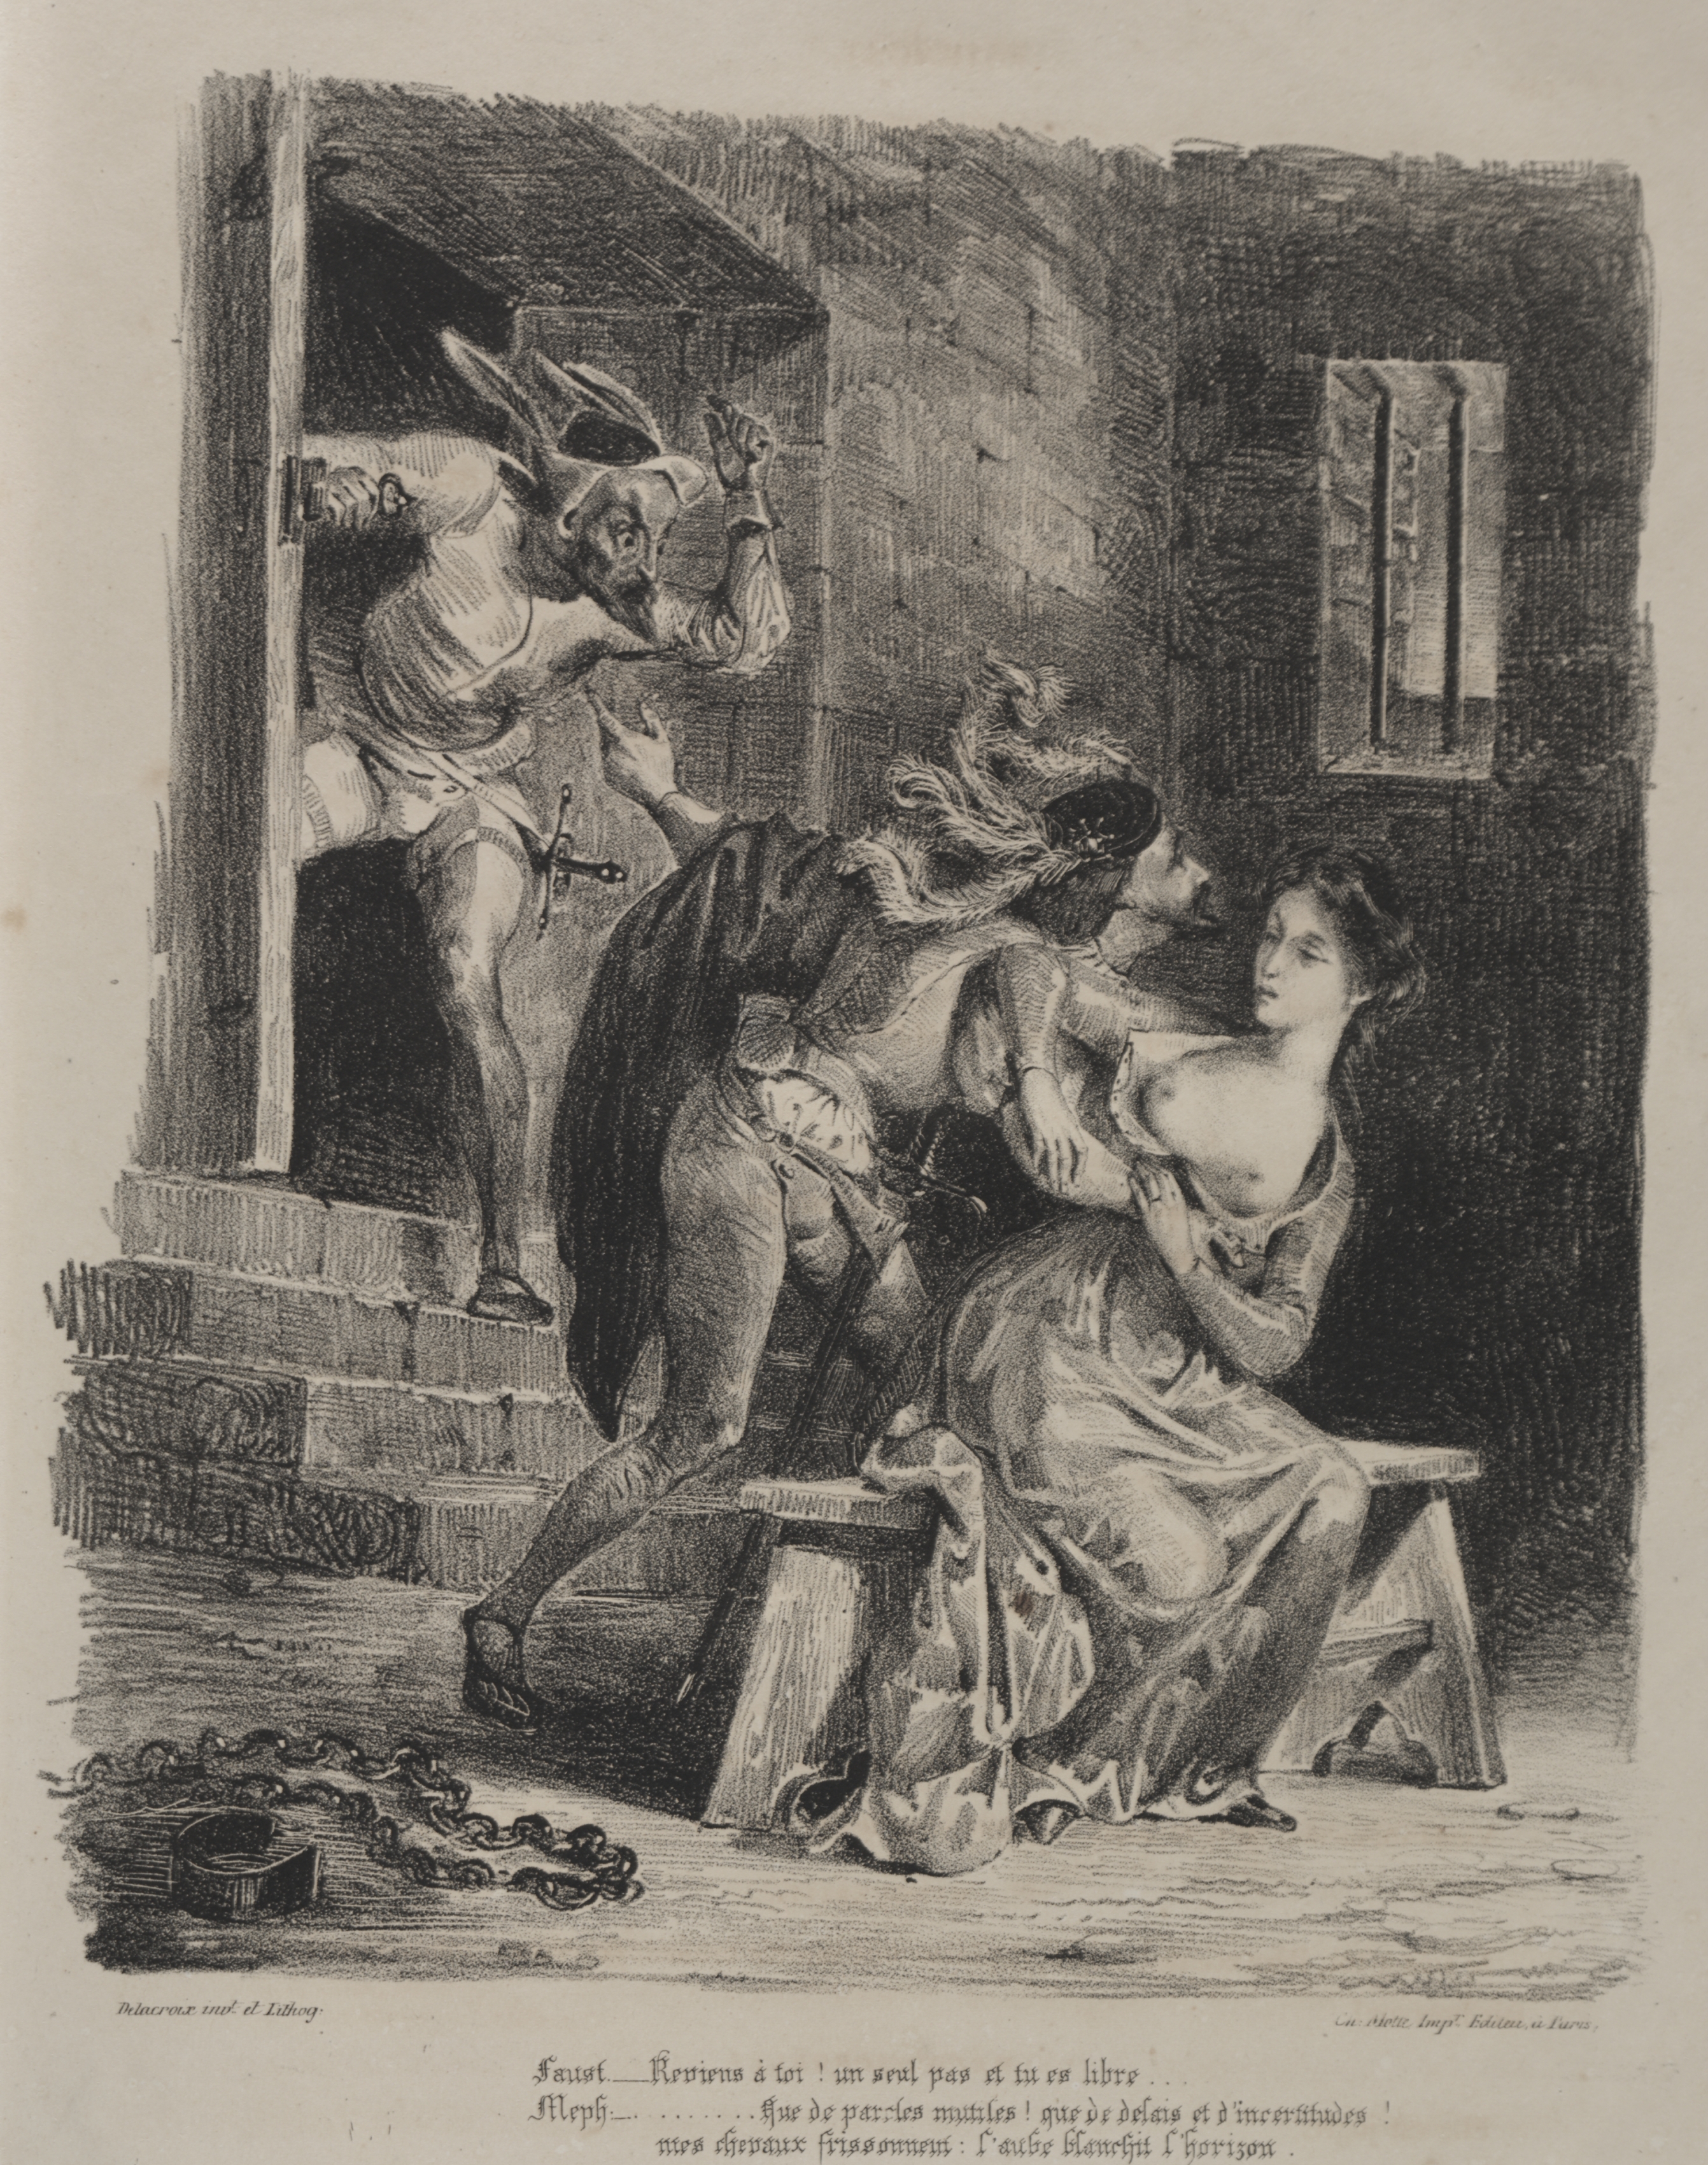 Illustrations for Faust: Faust in the prison of Marguerite